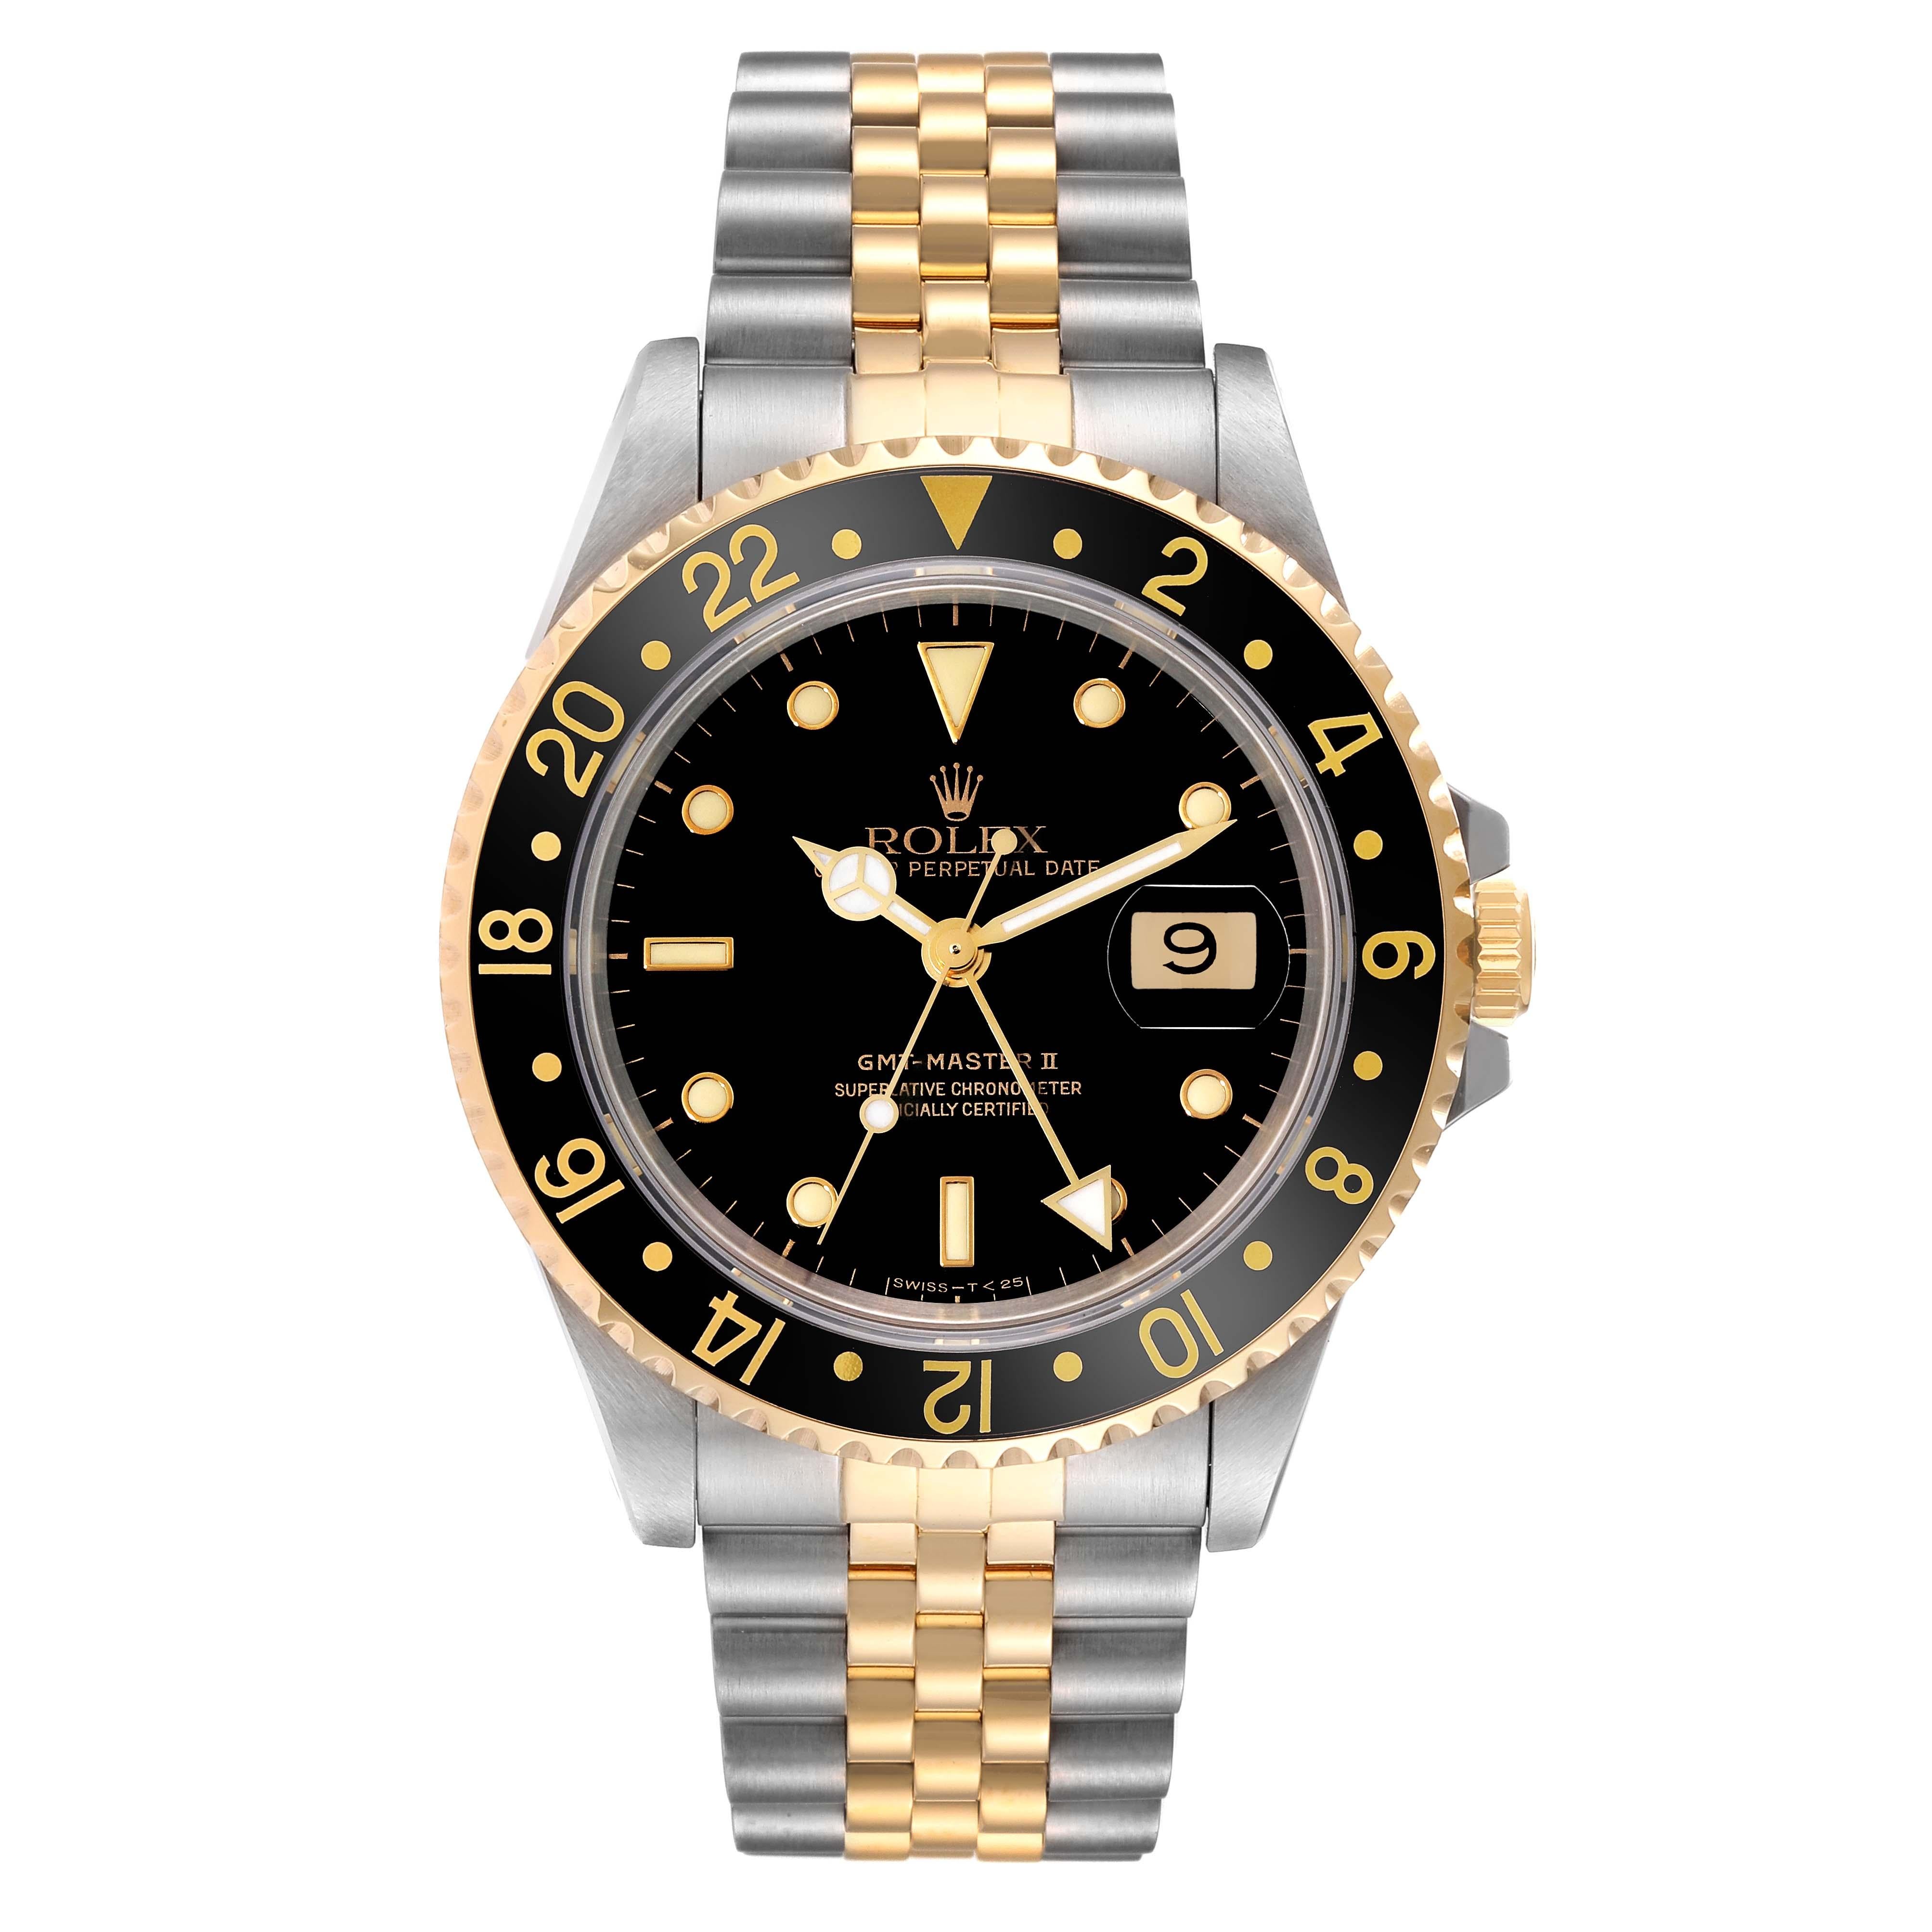 Rolex GMT Master II Yellow Gold Steel Jubilee Bracelet Mens Watch 16713. Officially certified chronometer automatic self-winding movement. Stainless steel case 40 mm in diameter. Rolex logo on a crown. 18k yellow gold bidirectional rotating bezel